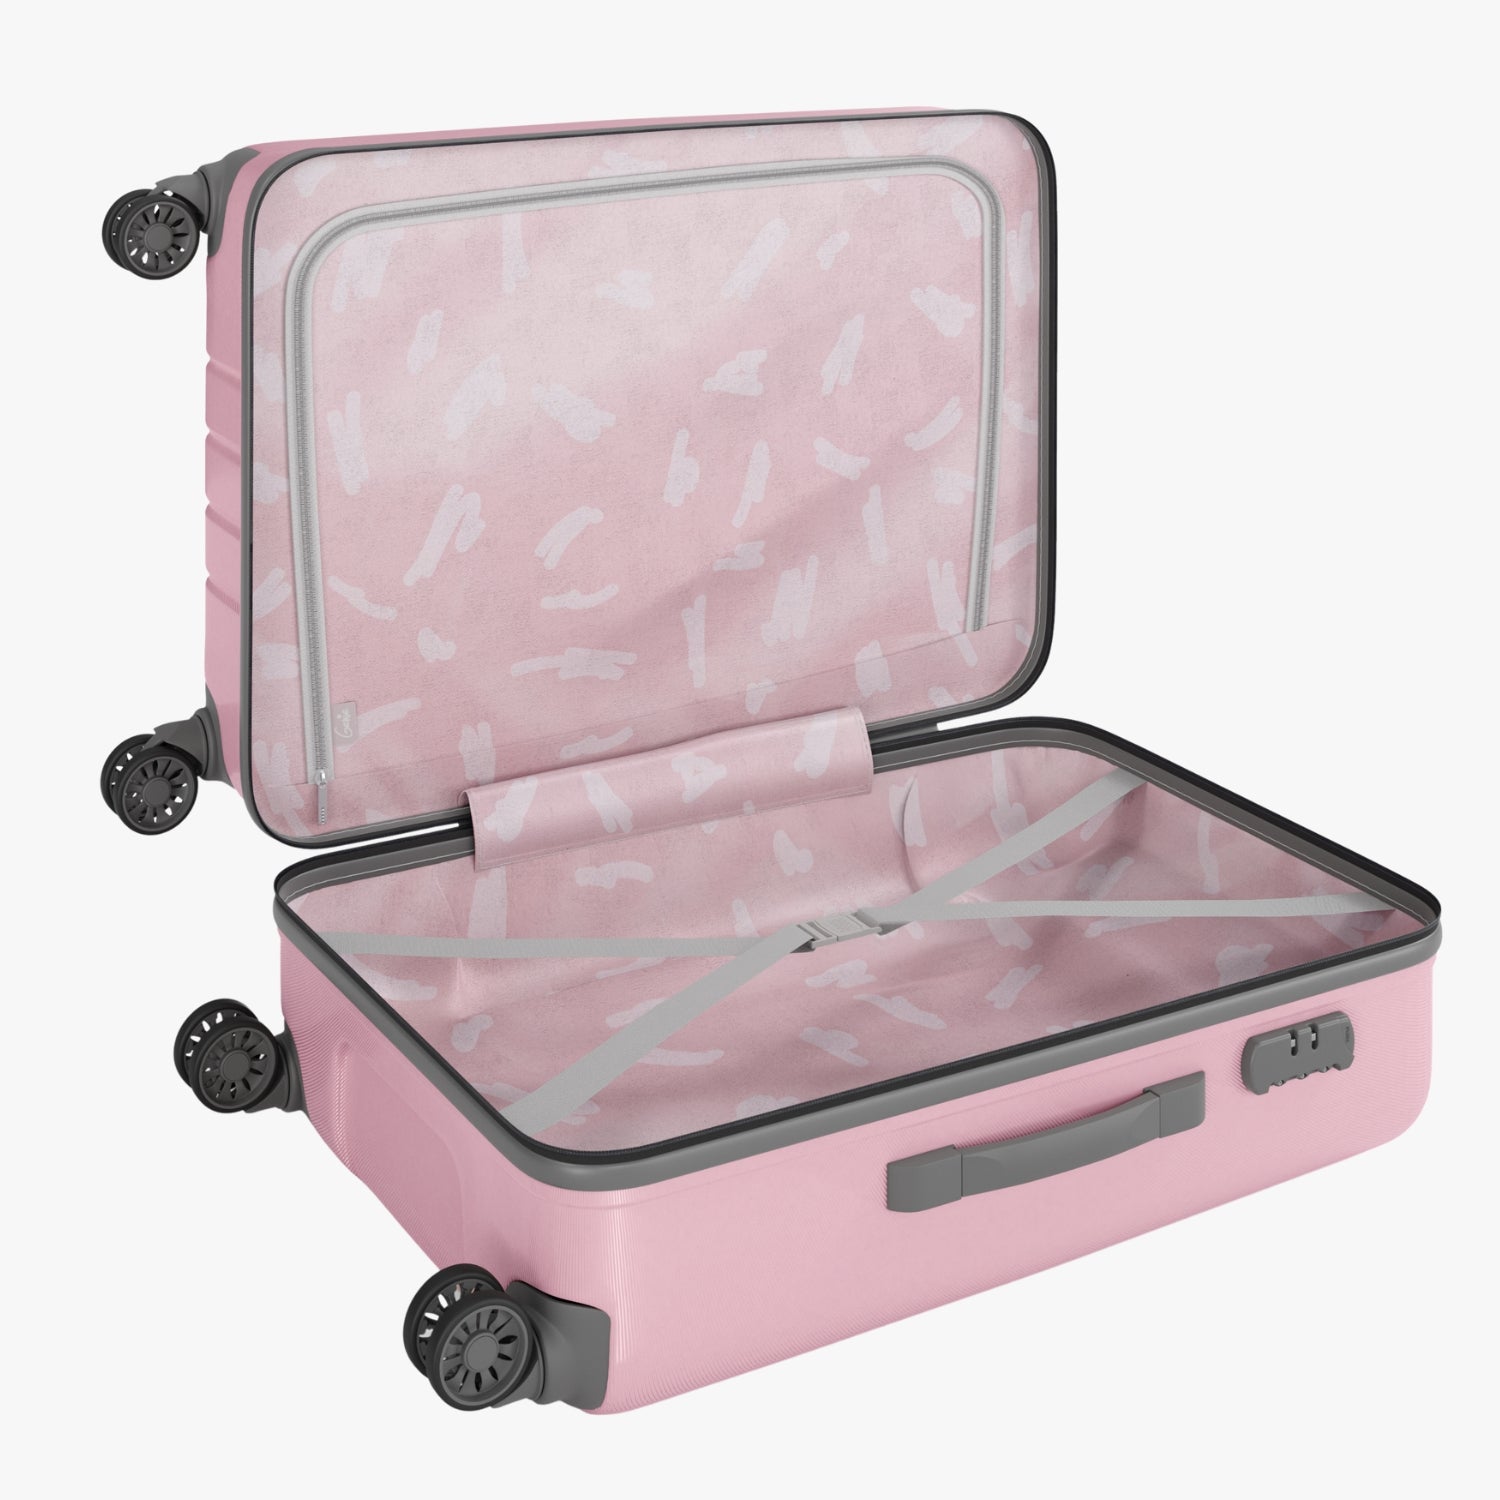 Genie Swing Marshmallow Pink Trolley Bag With Dual Wheels & Fixed Combination Lock